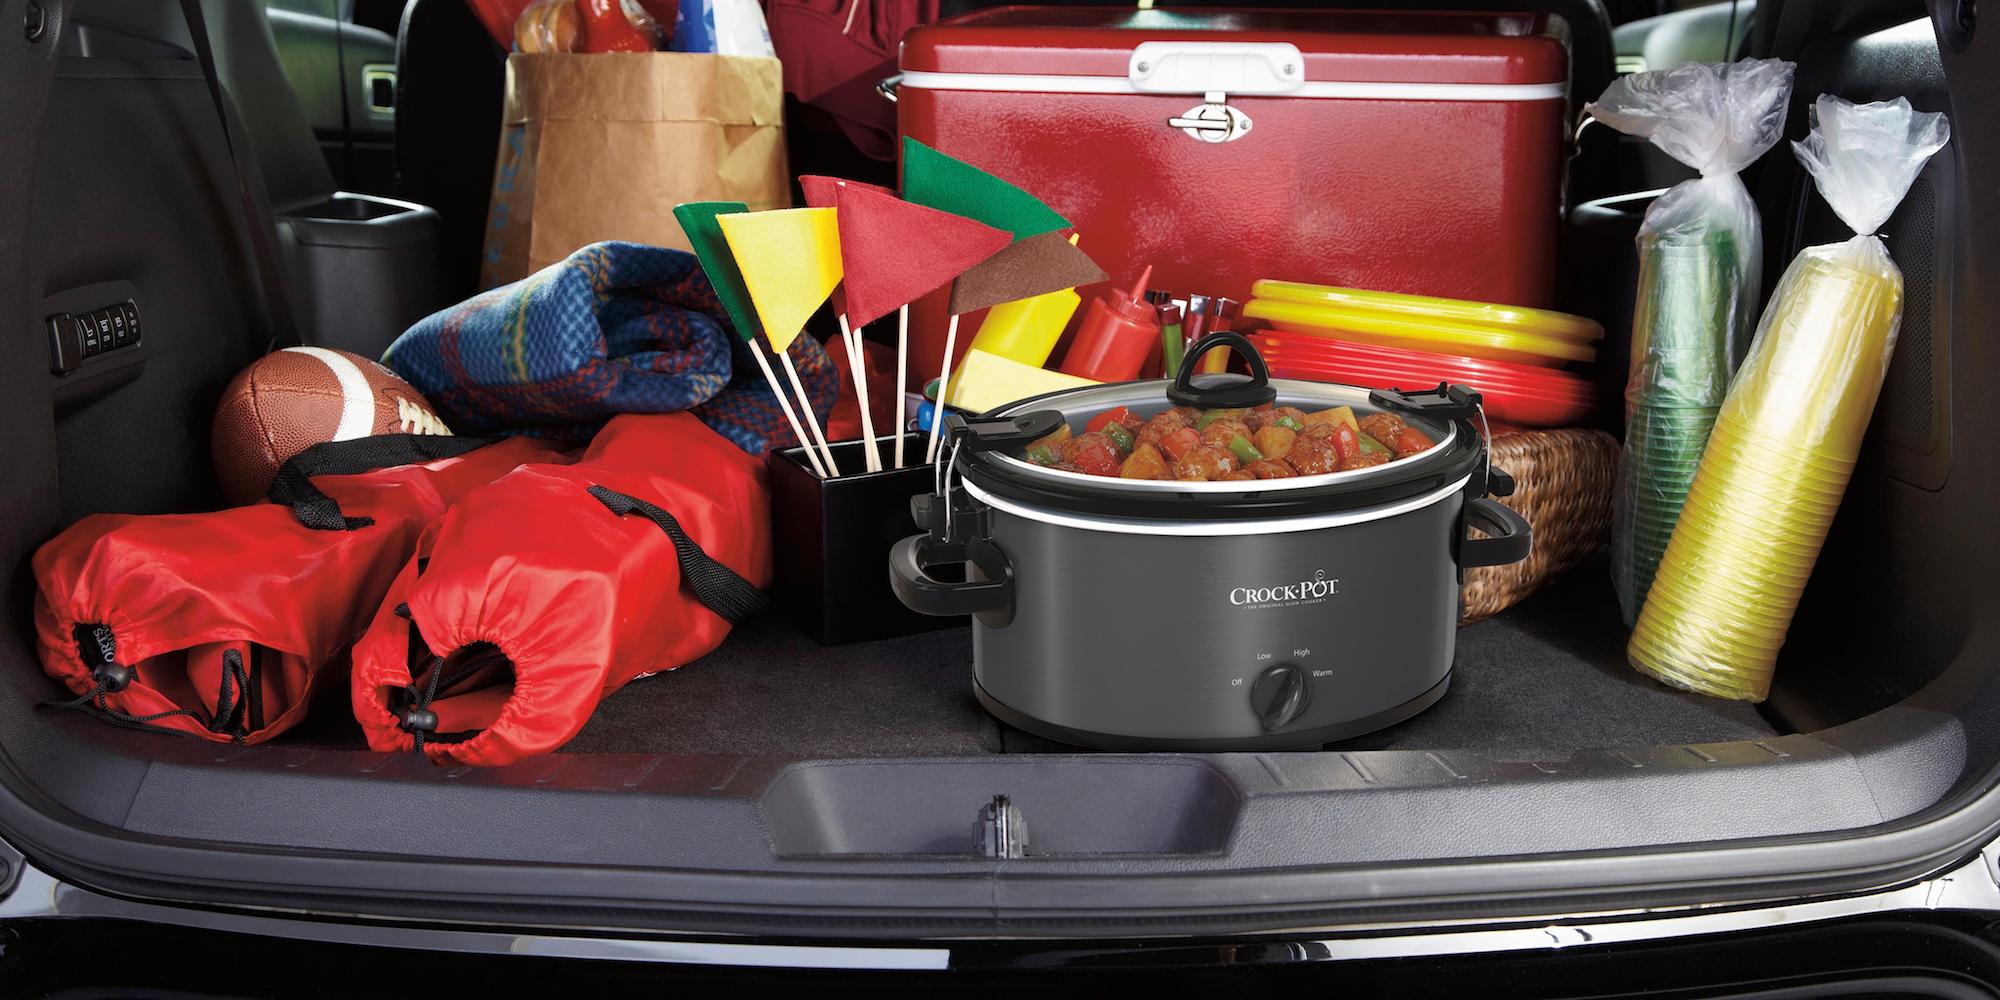 Grab a Crock-Pot 5-Quart Slow Cooker for today only at $17.50 (Reg